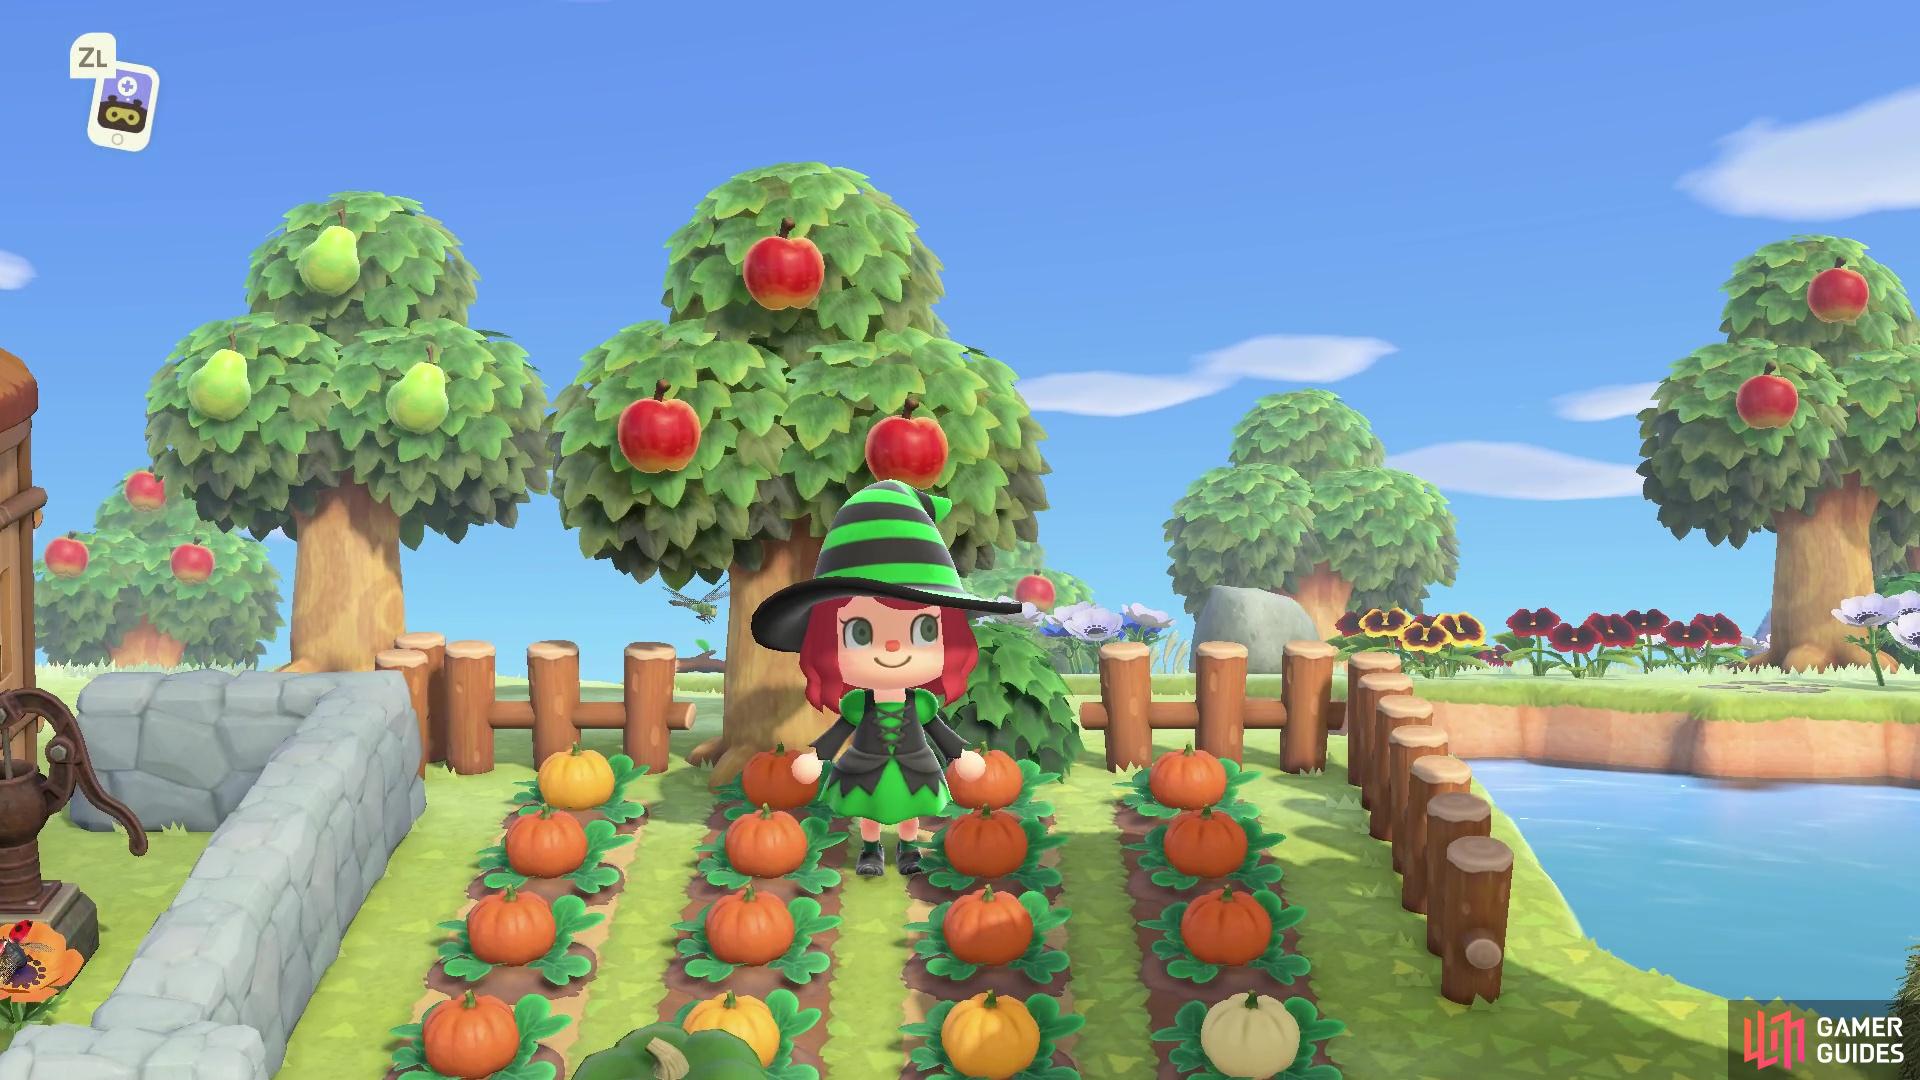 It's time to plant some pumpkins ahead of Halloween!